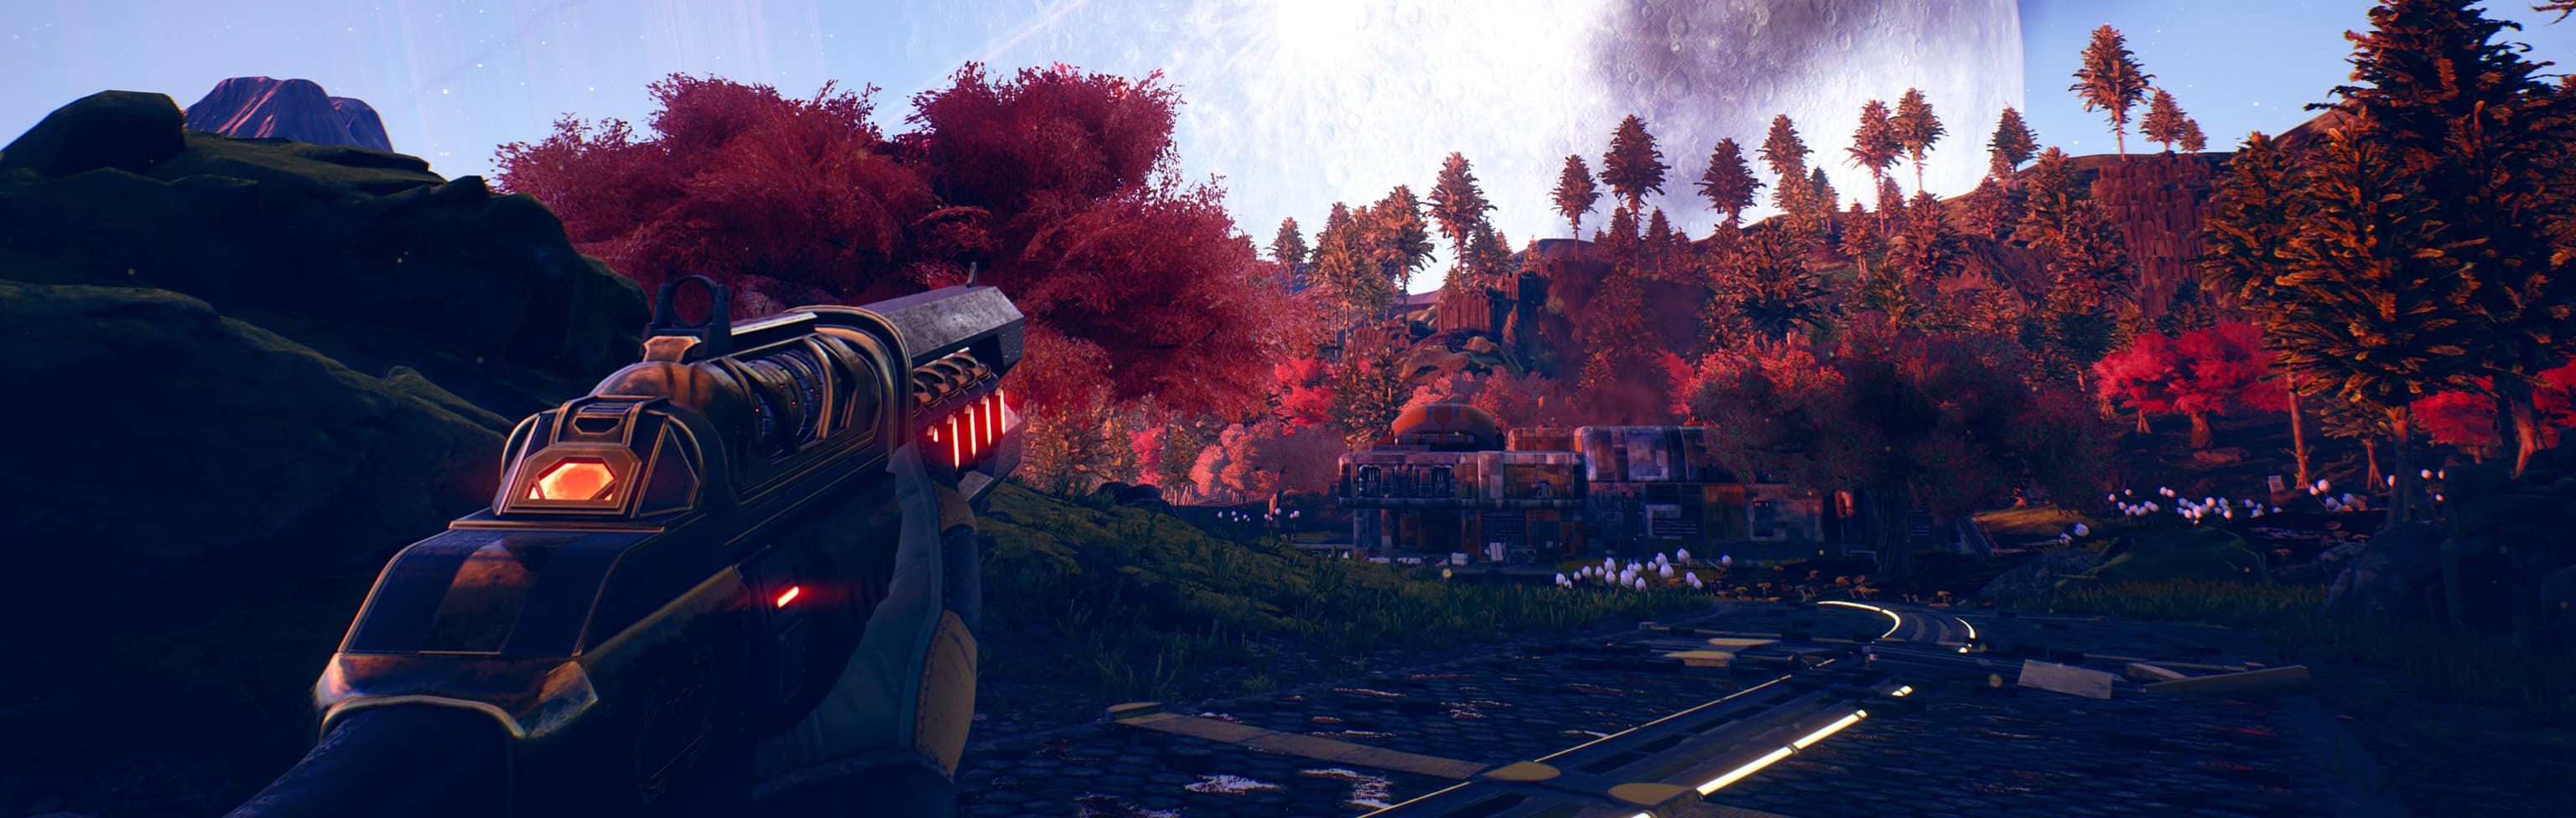 Compre The Outer Worlds para PC, PS4™, Xbox, Switch | Loja oficial